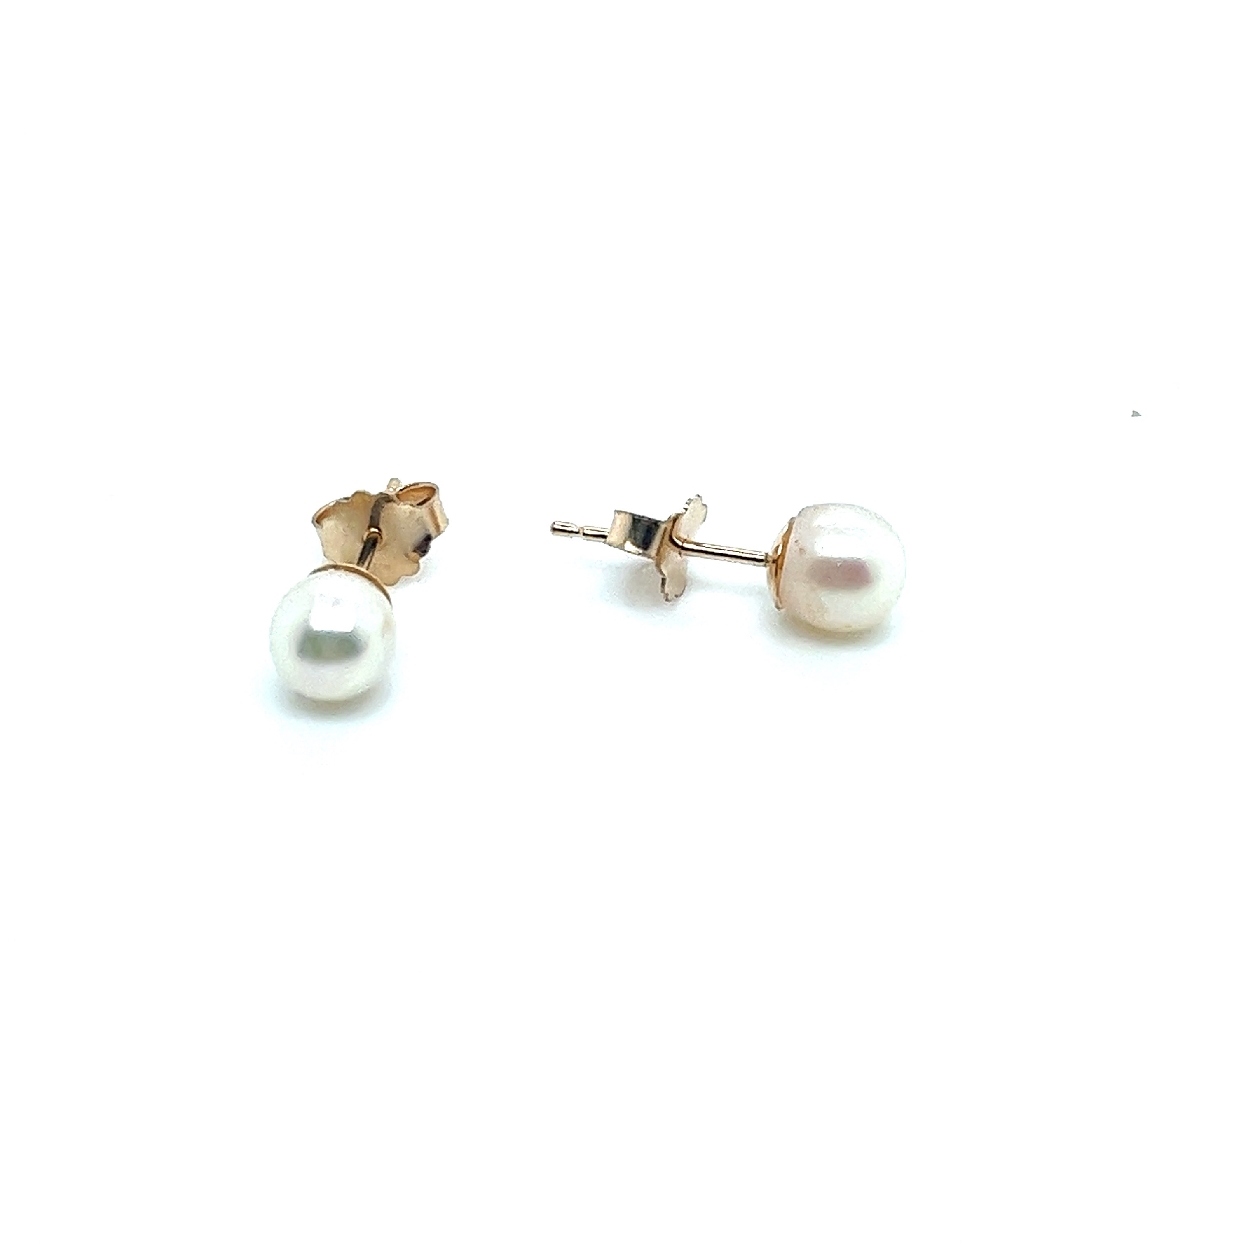 5mm Salt Water Pearl Stud Earrings on 14K Yellow Gold Post with Friction Back